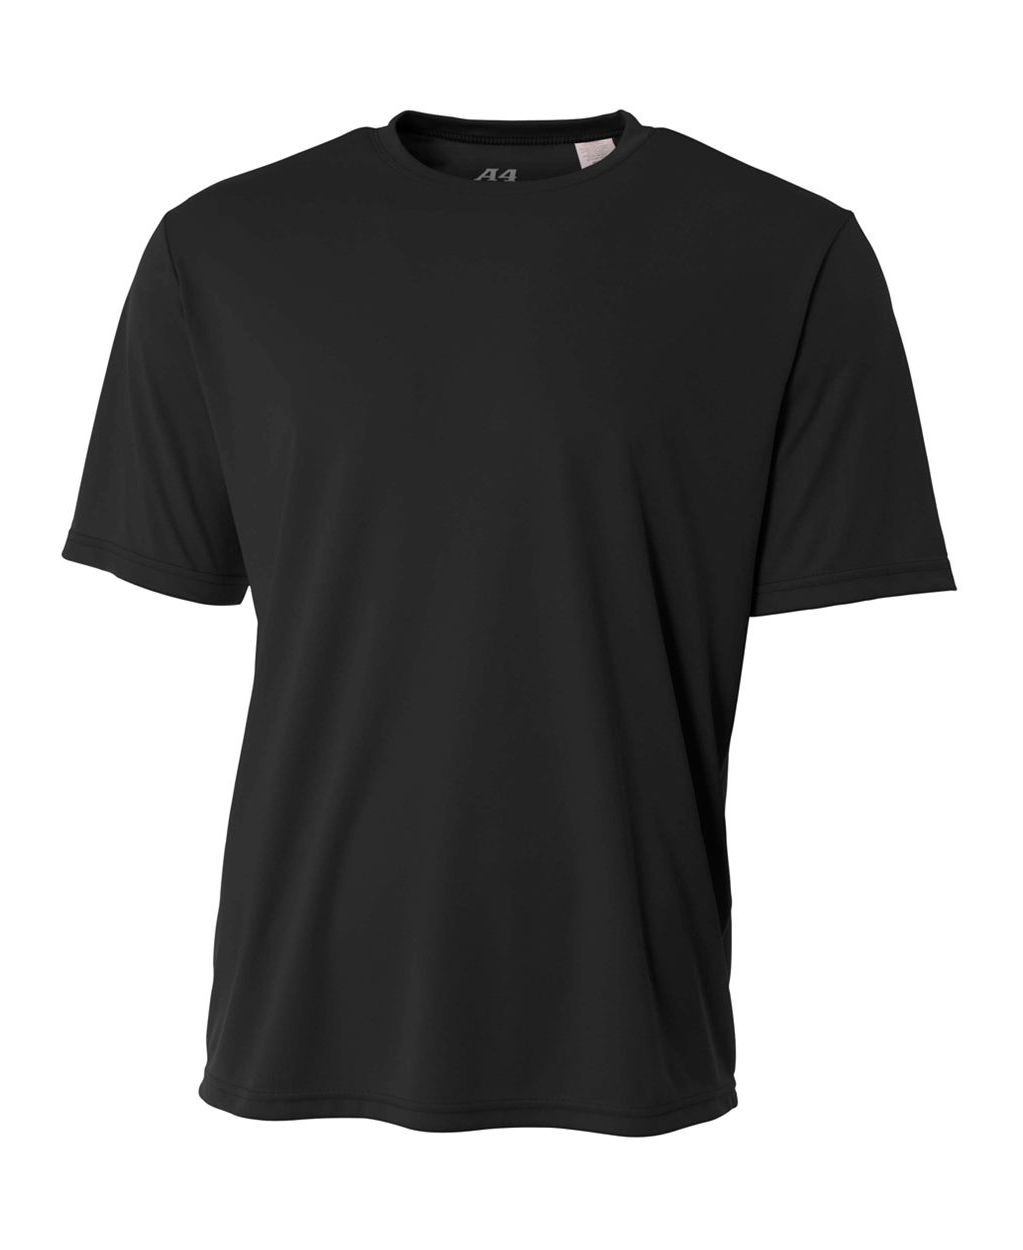 Cooling Performance Shirt | A4 N3142 | Lucky Wear Distributing